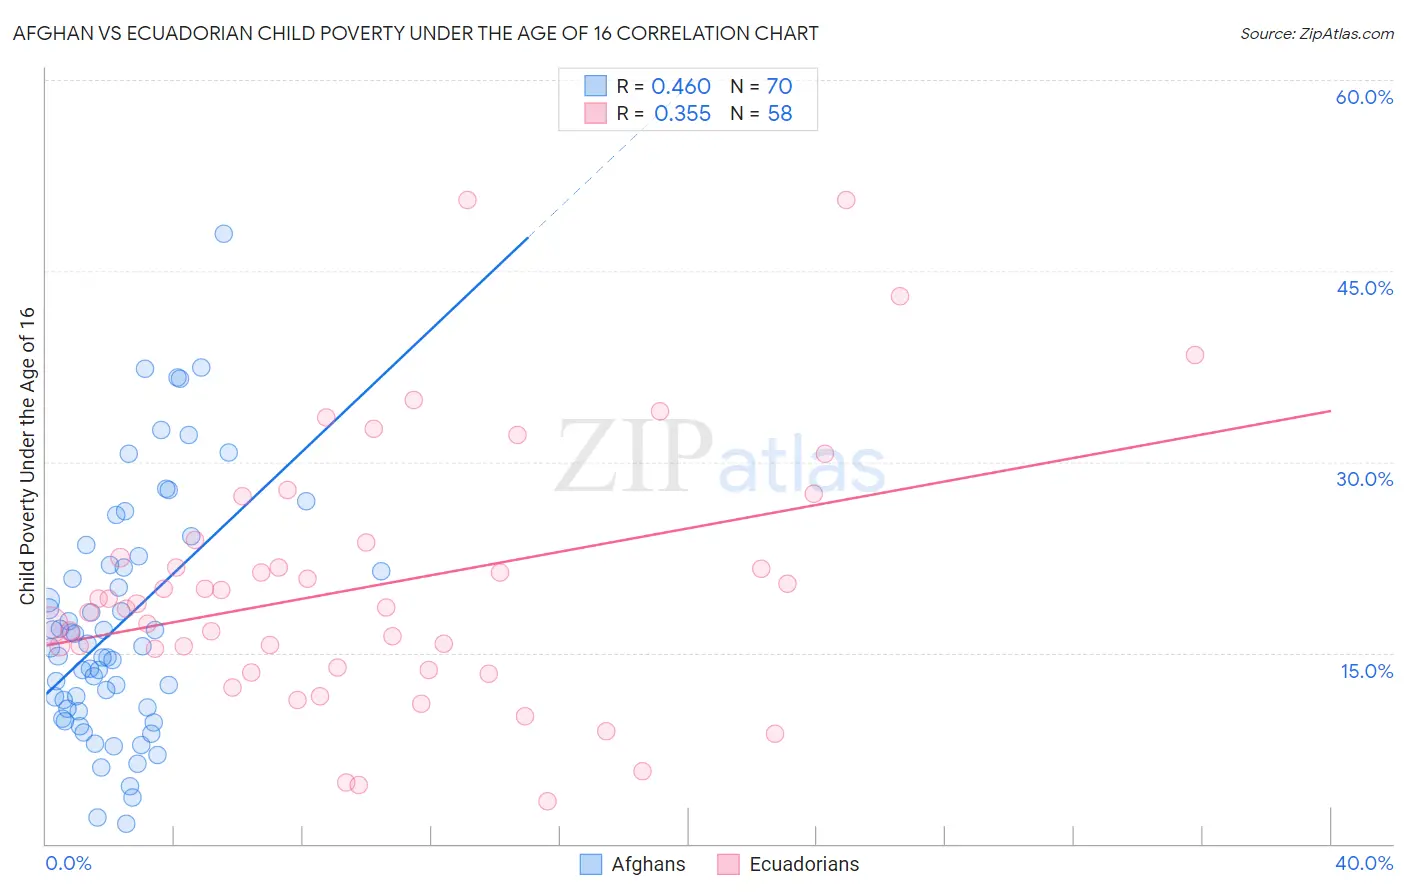 Afghan vs Ecuadorian Child Poverty Under the Age of 16